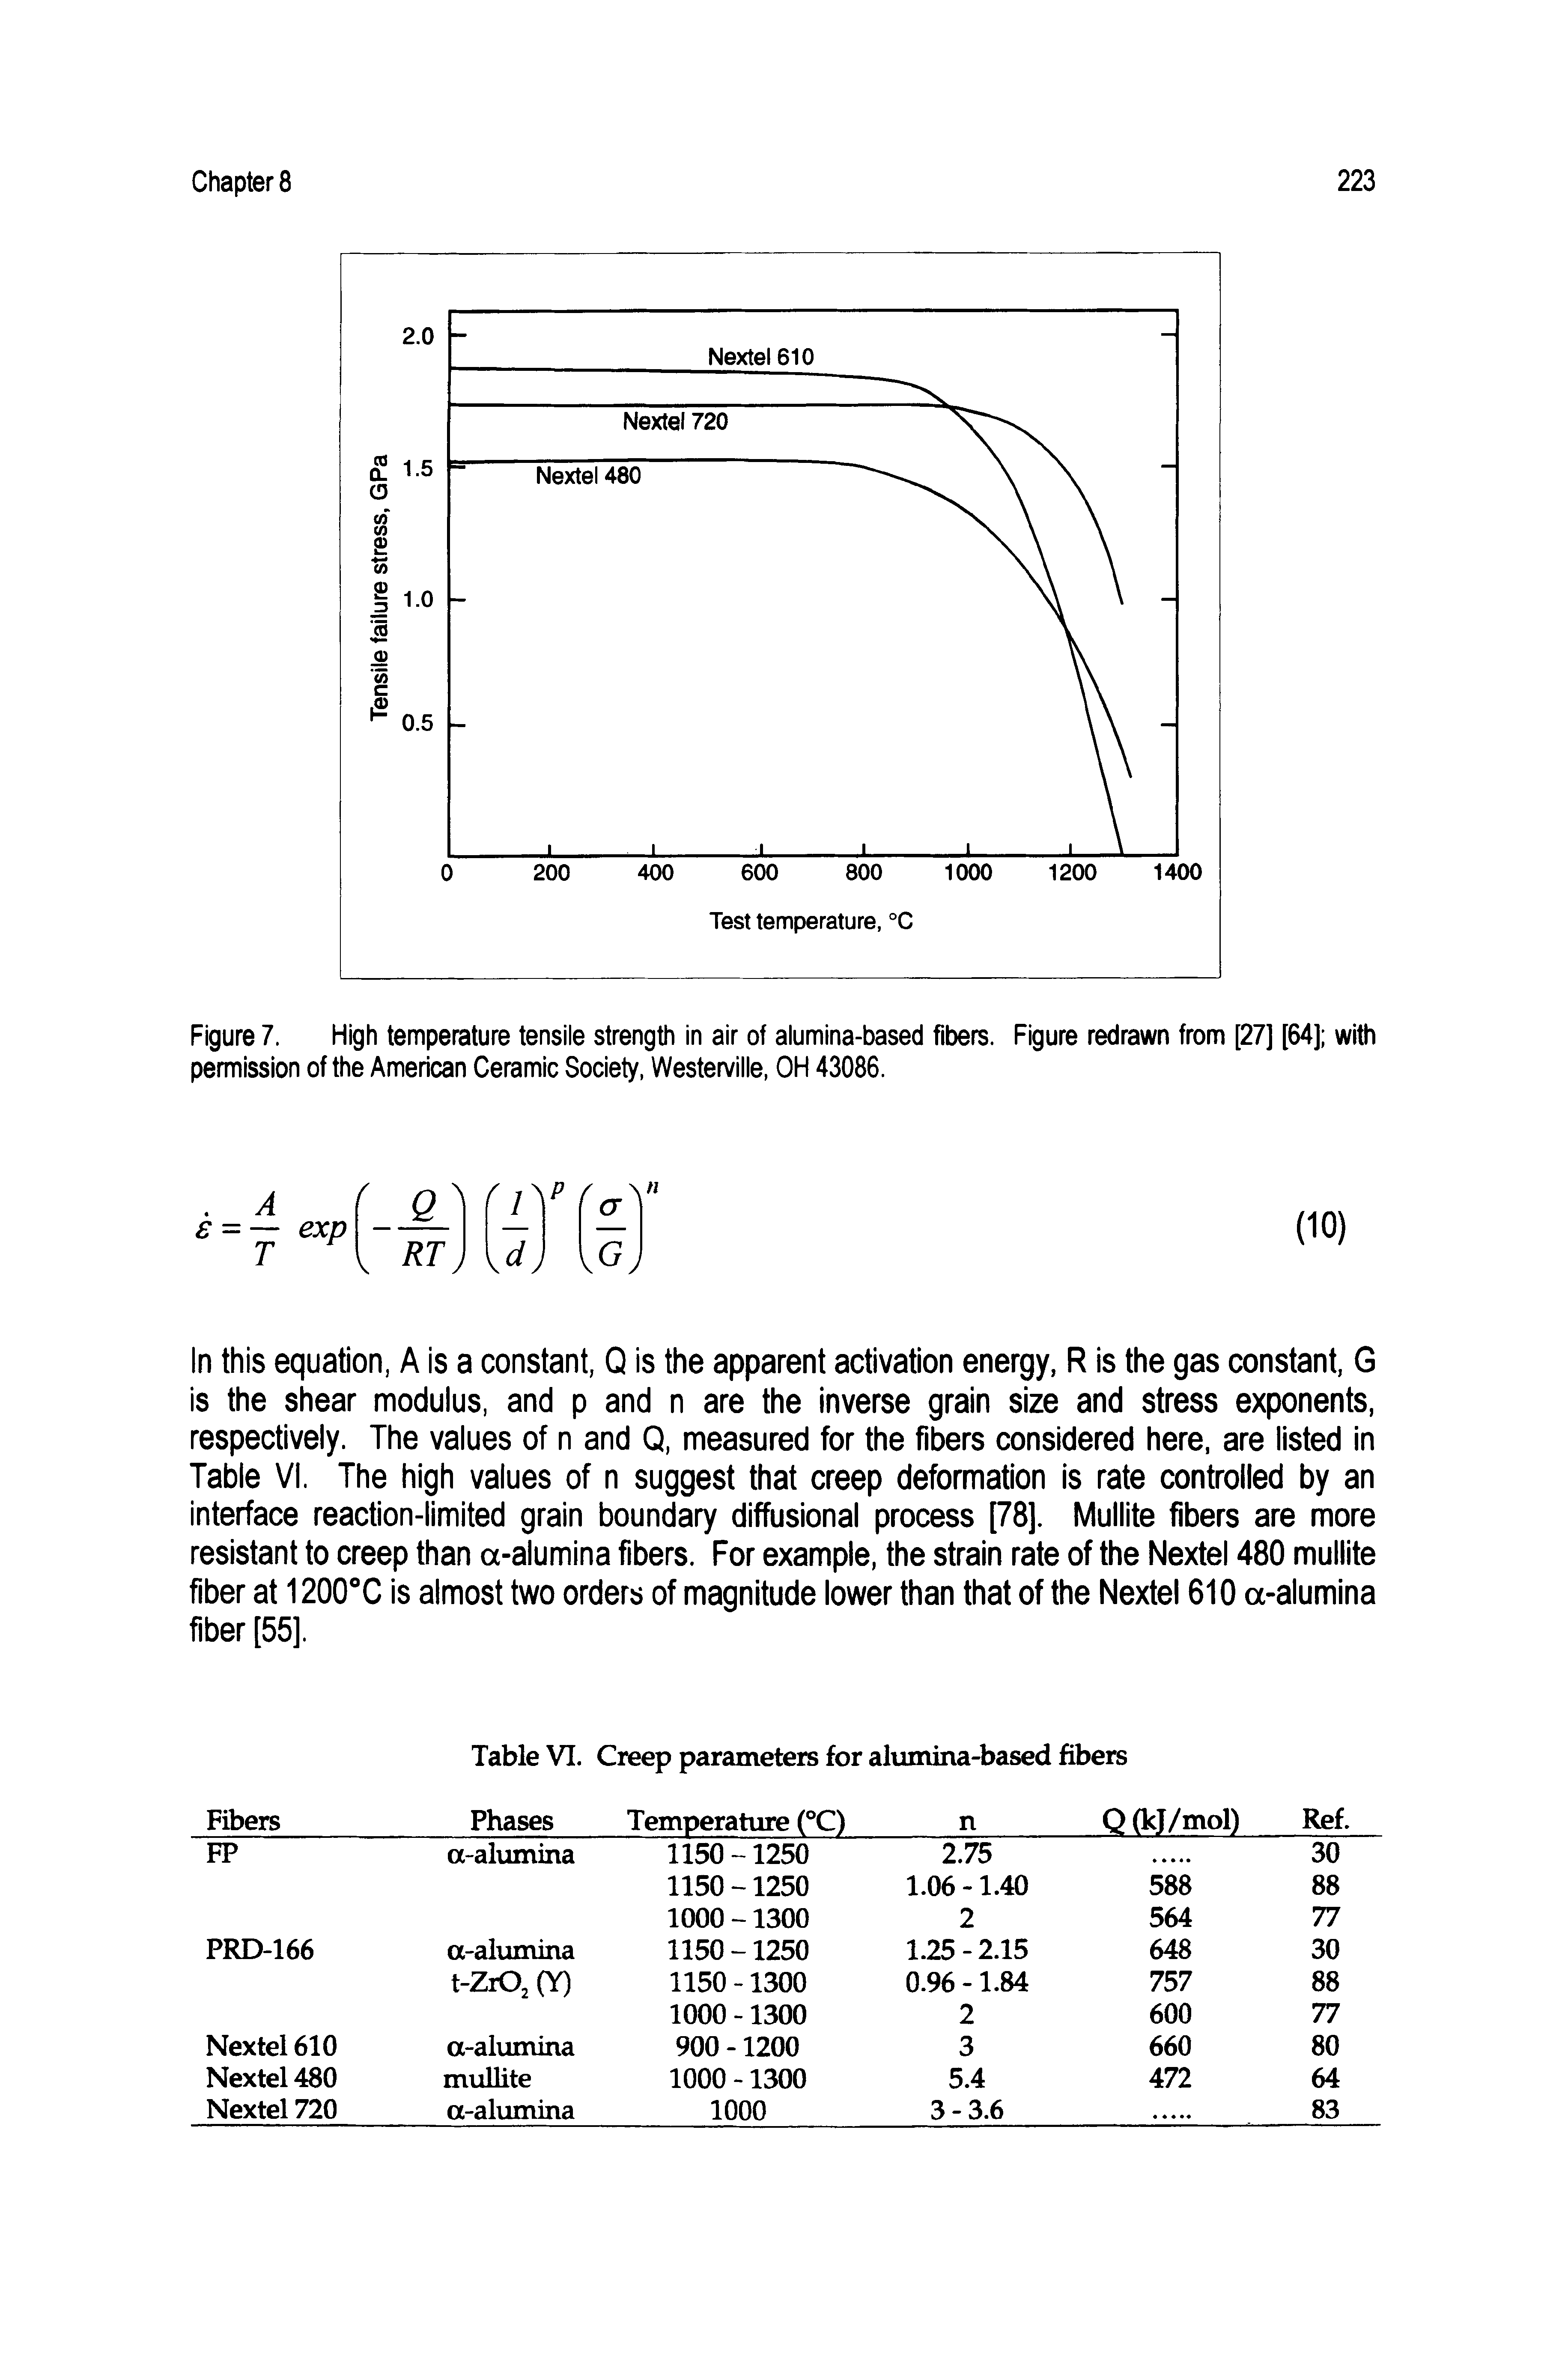 Figure 7. High temperature tensile strength in air of alumina-based fibers. Figure redrawn from [27] [64] with permission of the American Ceramic Society, Westerville, OH 43086.